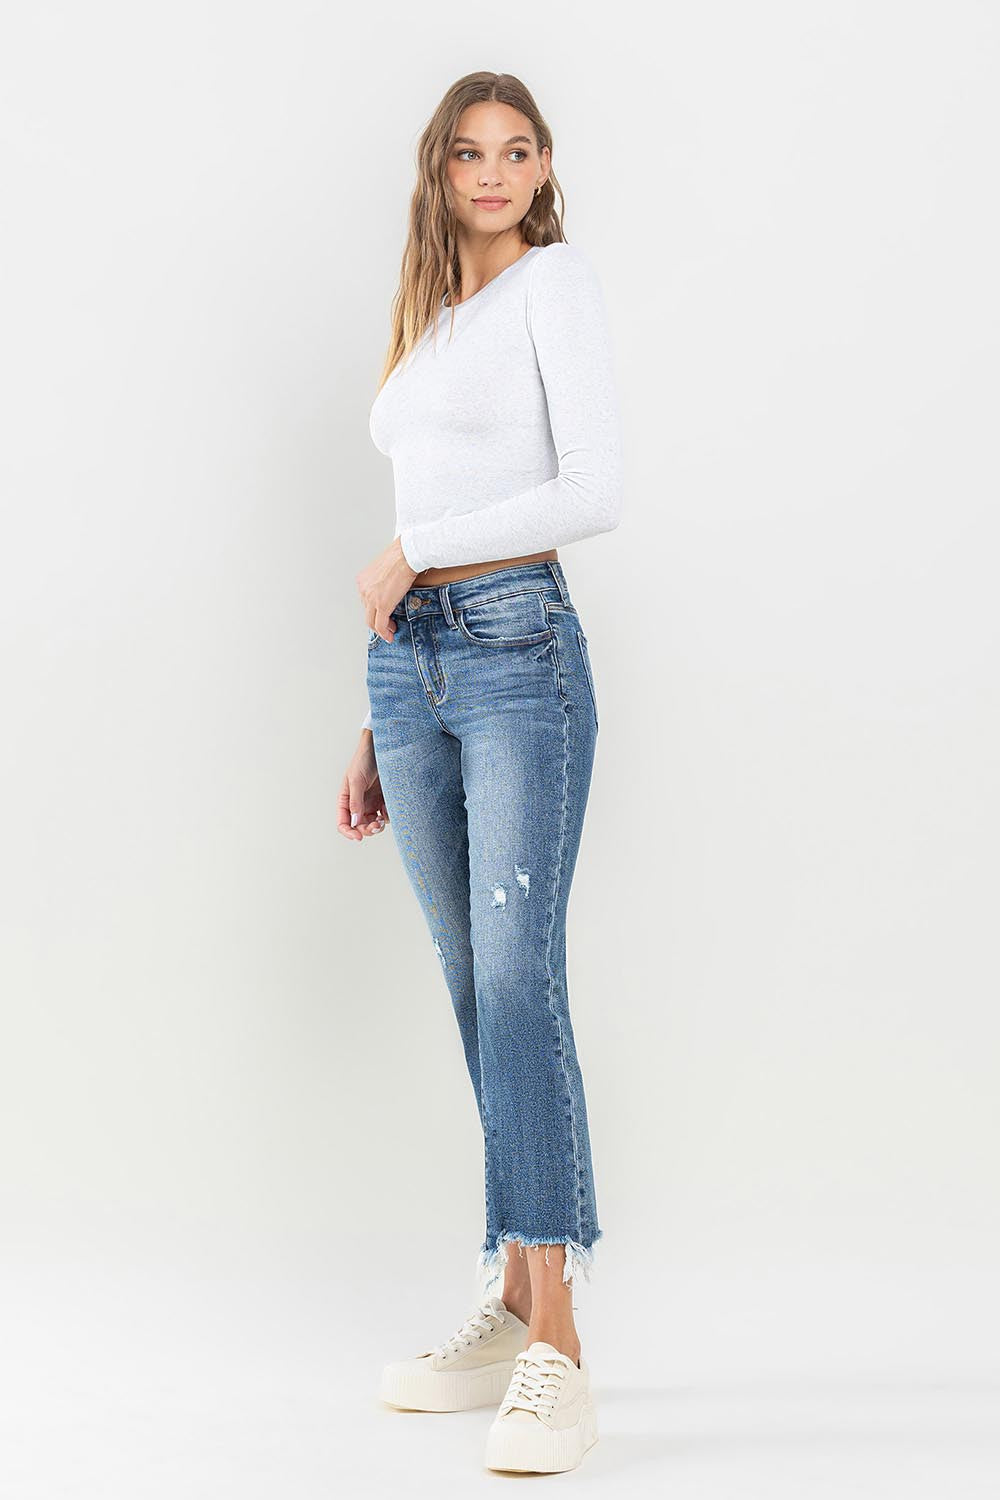 These mid rise frayed hem jeans are the perfect addition to any casual outfit. The frayed hem adds a trendy and edgy touch to the classic mid rise style. Made with high-quality denim, these jeans are both comfortable and durable. The mid rise waistline offers a flattering fit for all body types.